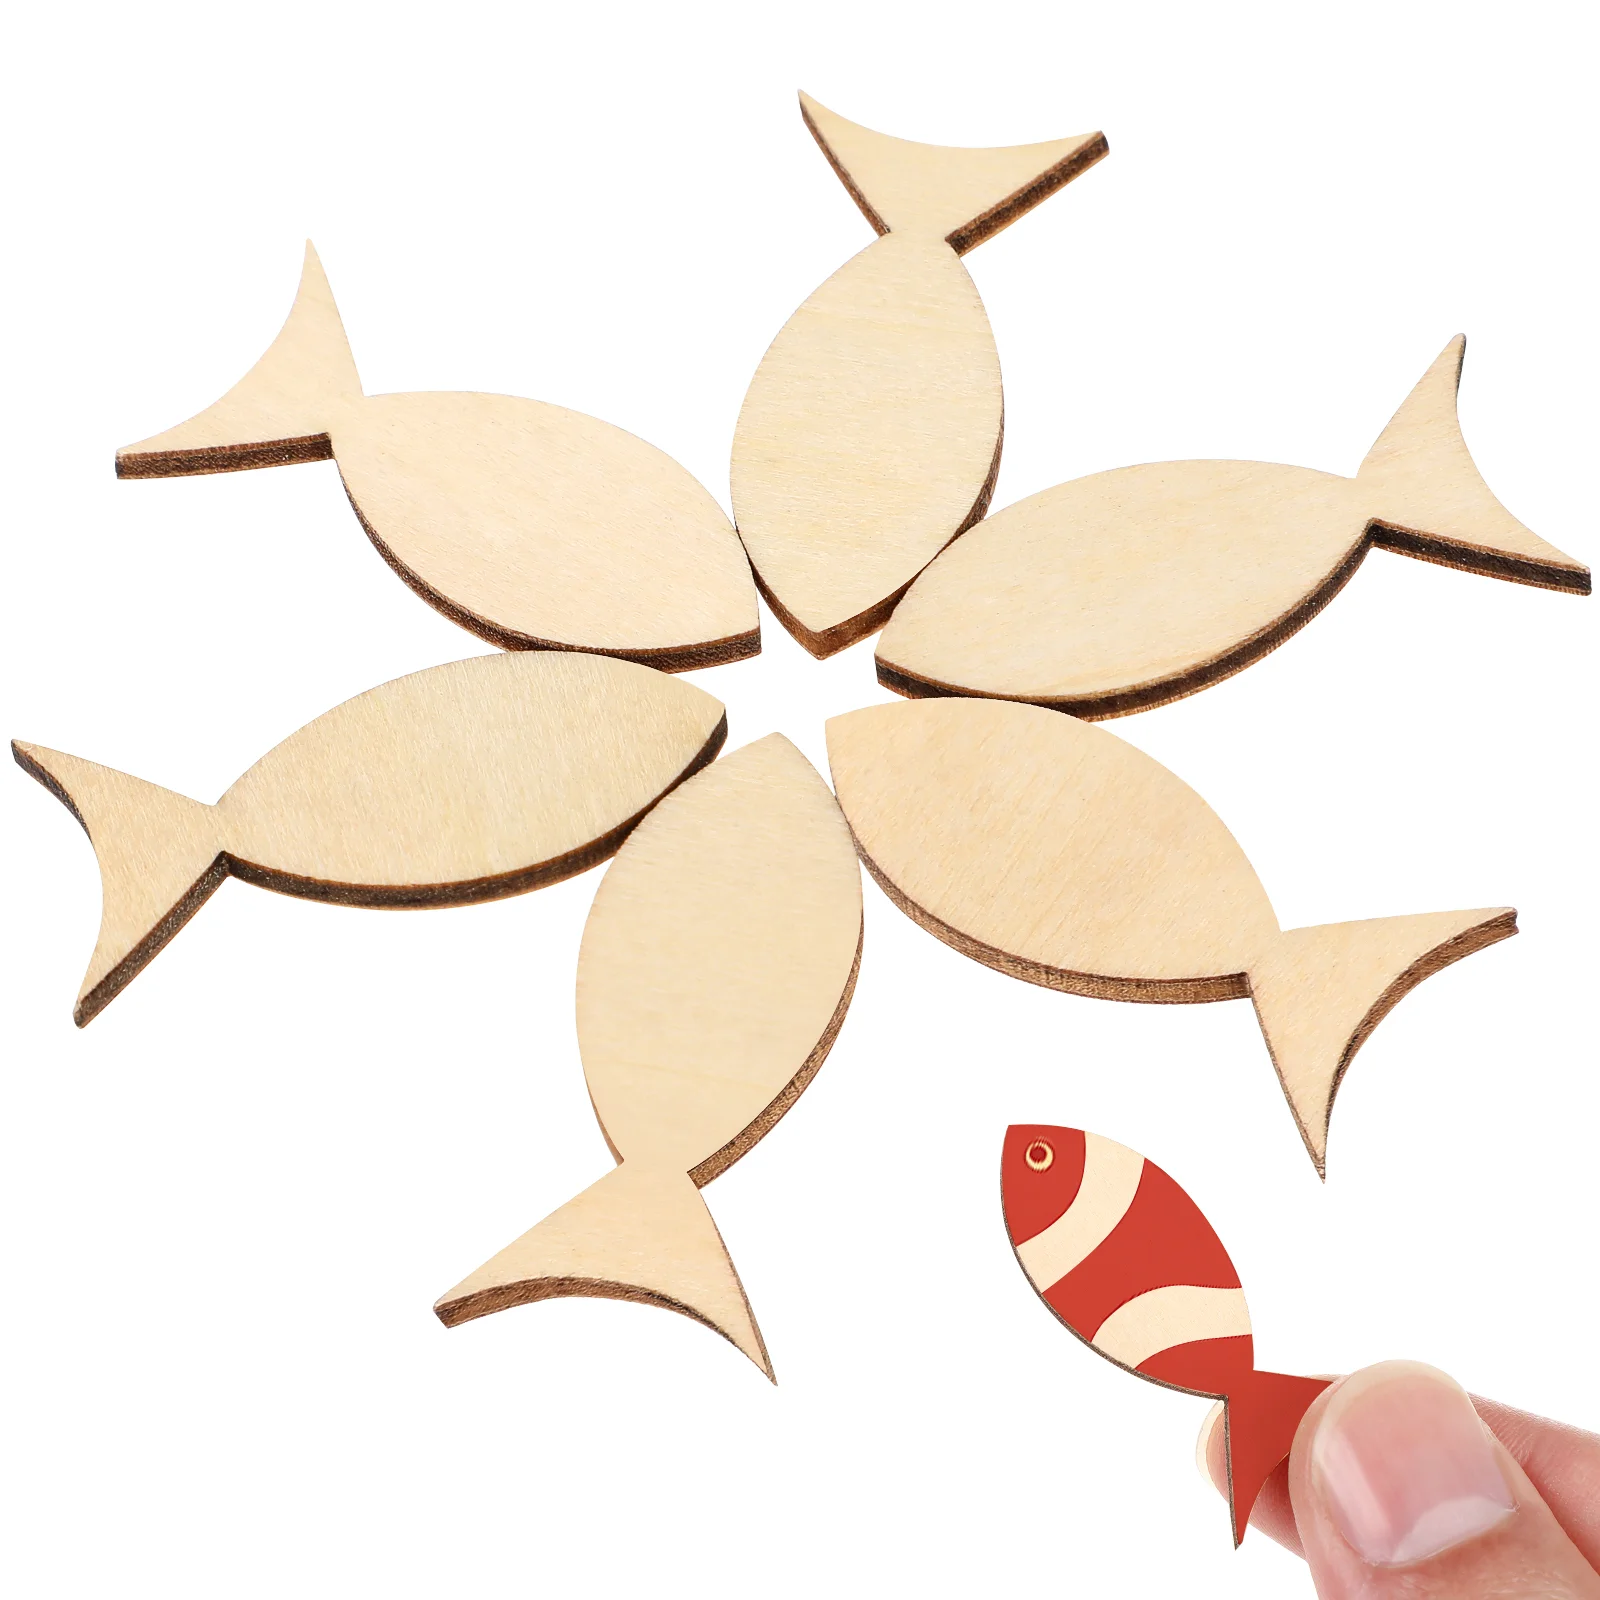 

100 Pcs Woodsy Decor Ship Ornaments Wooden Fish Unfinished Slices Craft Chip Shapes Crafting Gift Tags